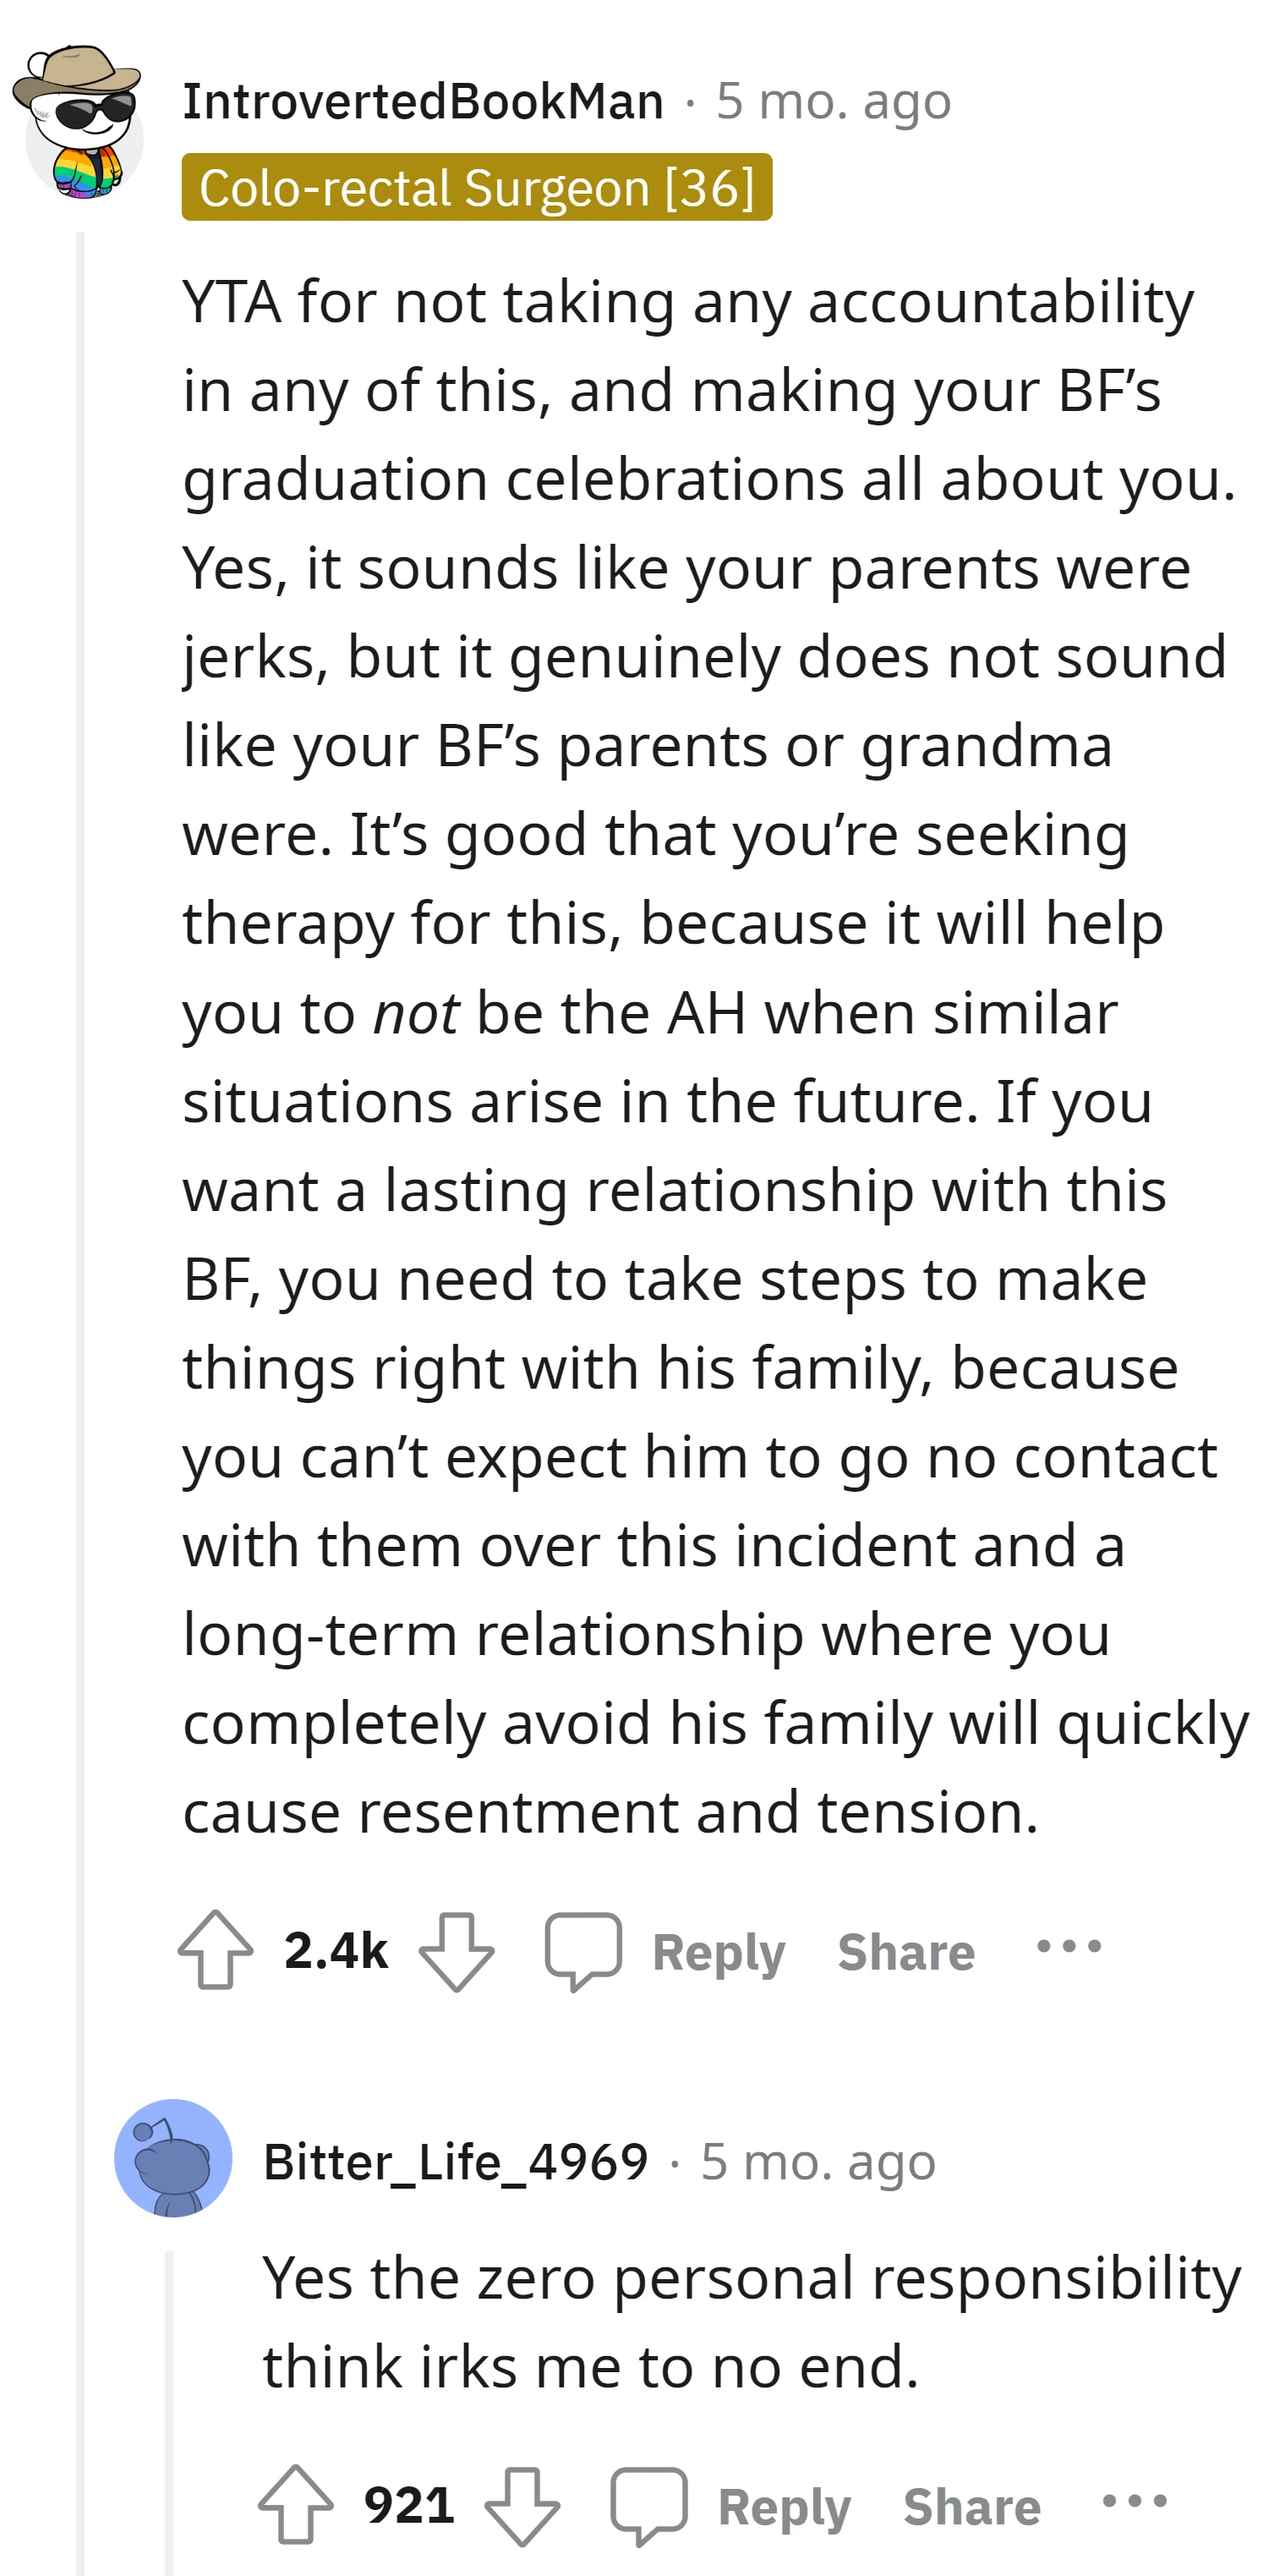 OP should make amends with his family for a lasting relationship